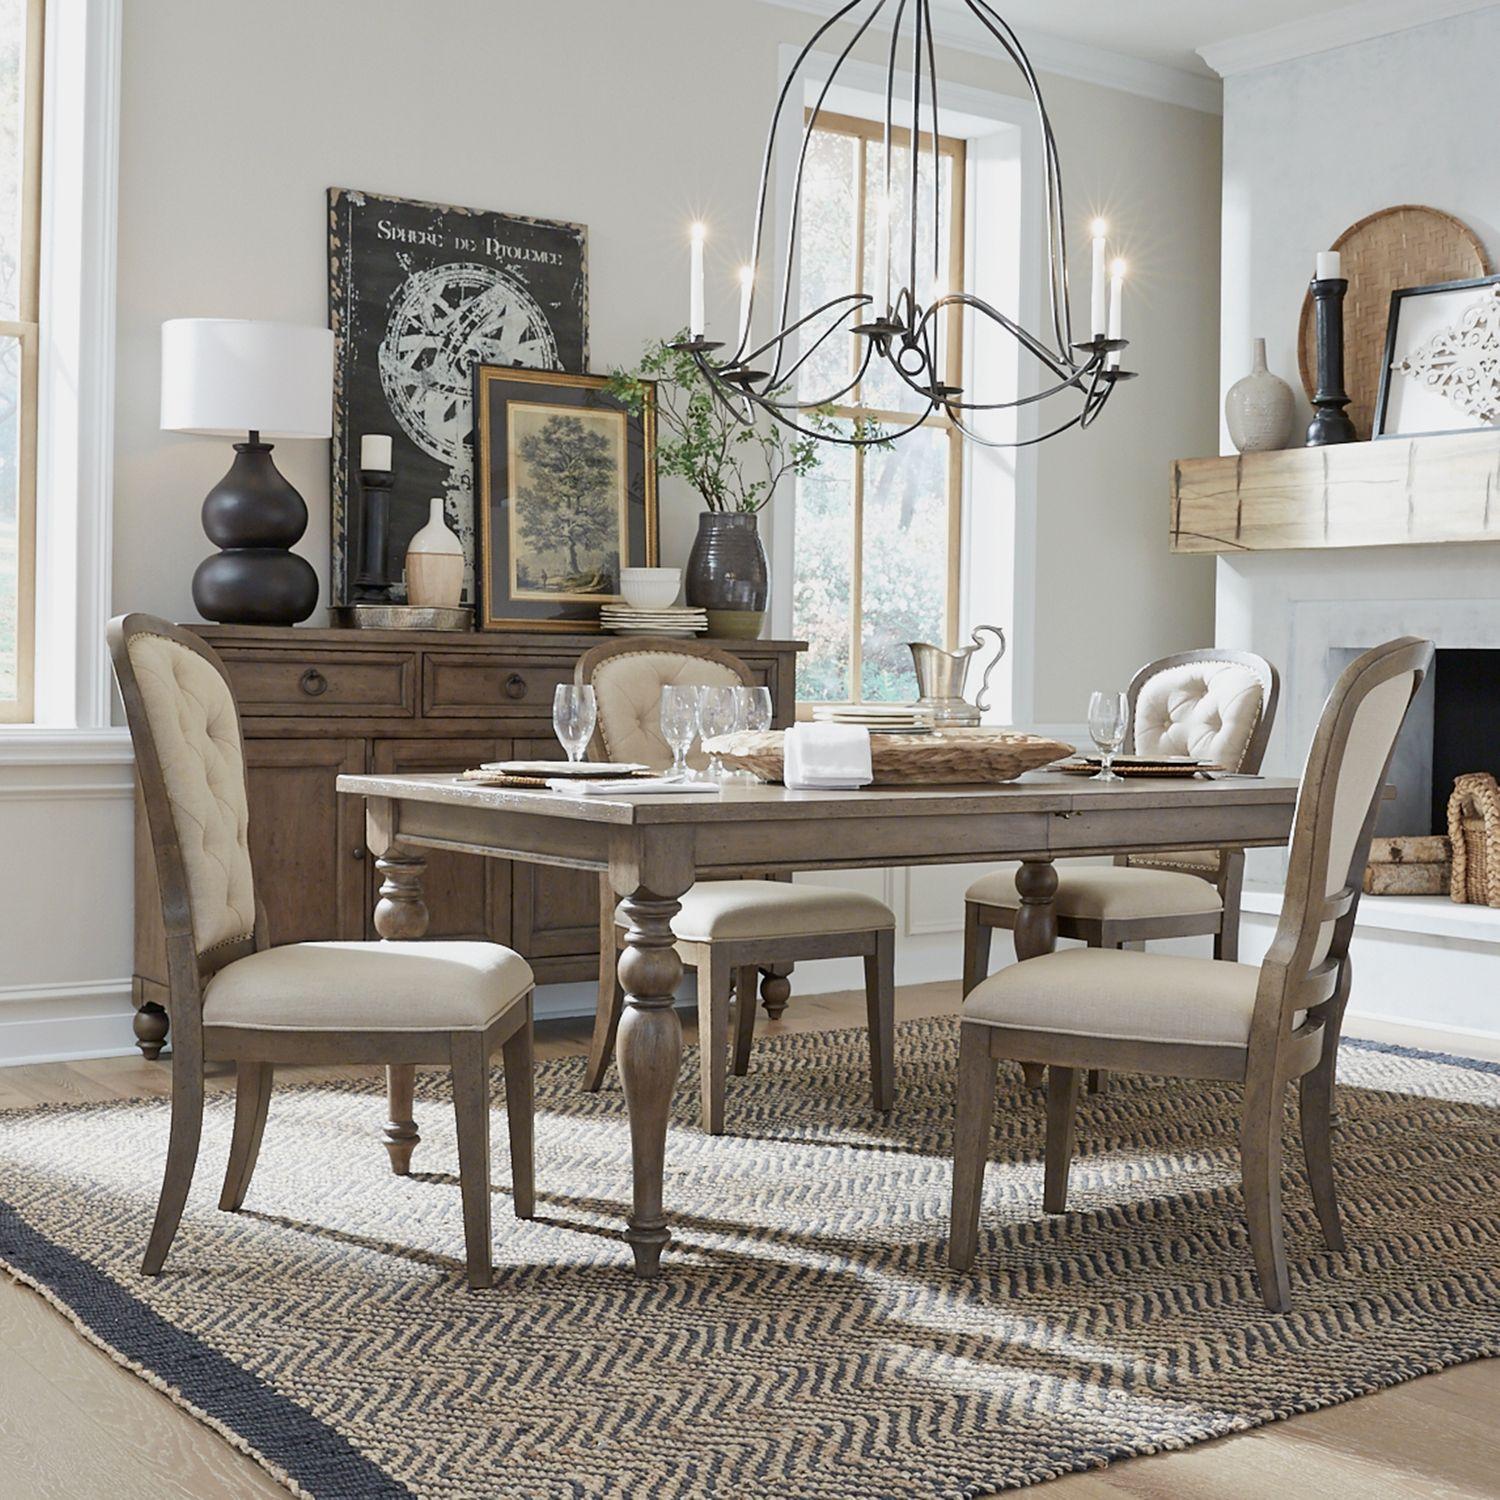 Transitional Dining Table Set Americana Farmhouse (615-DR) 615-DR-O5LTS in Taupe, Black 